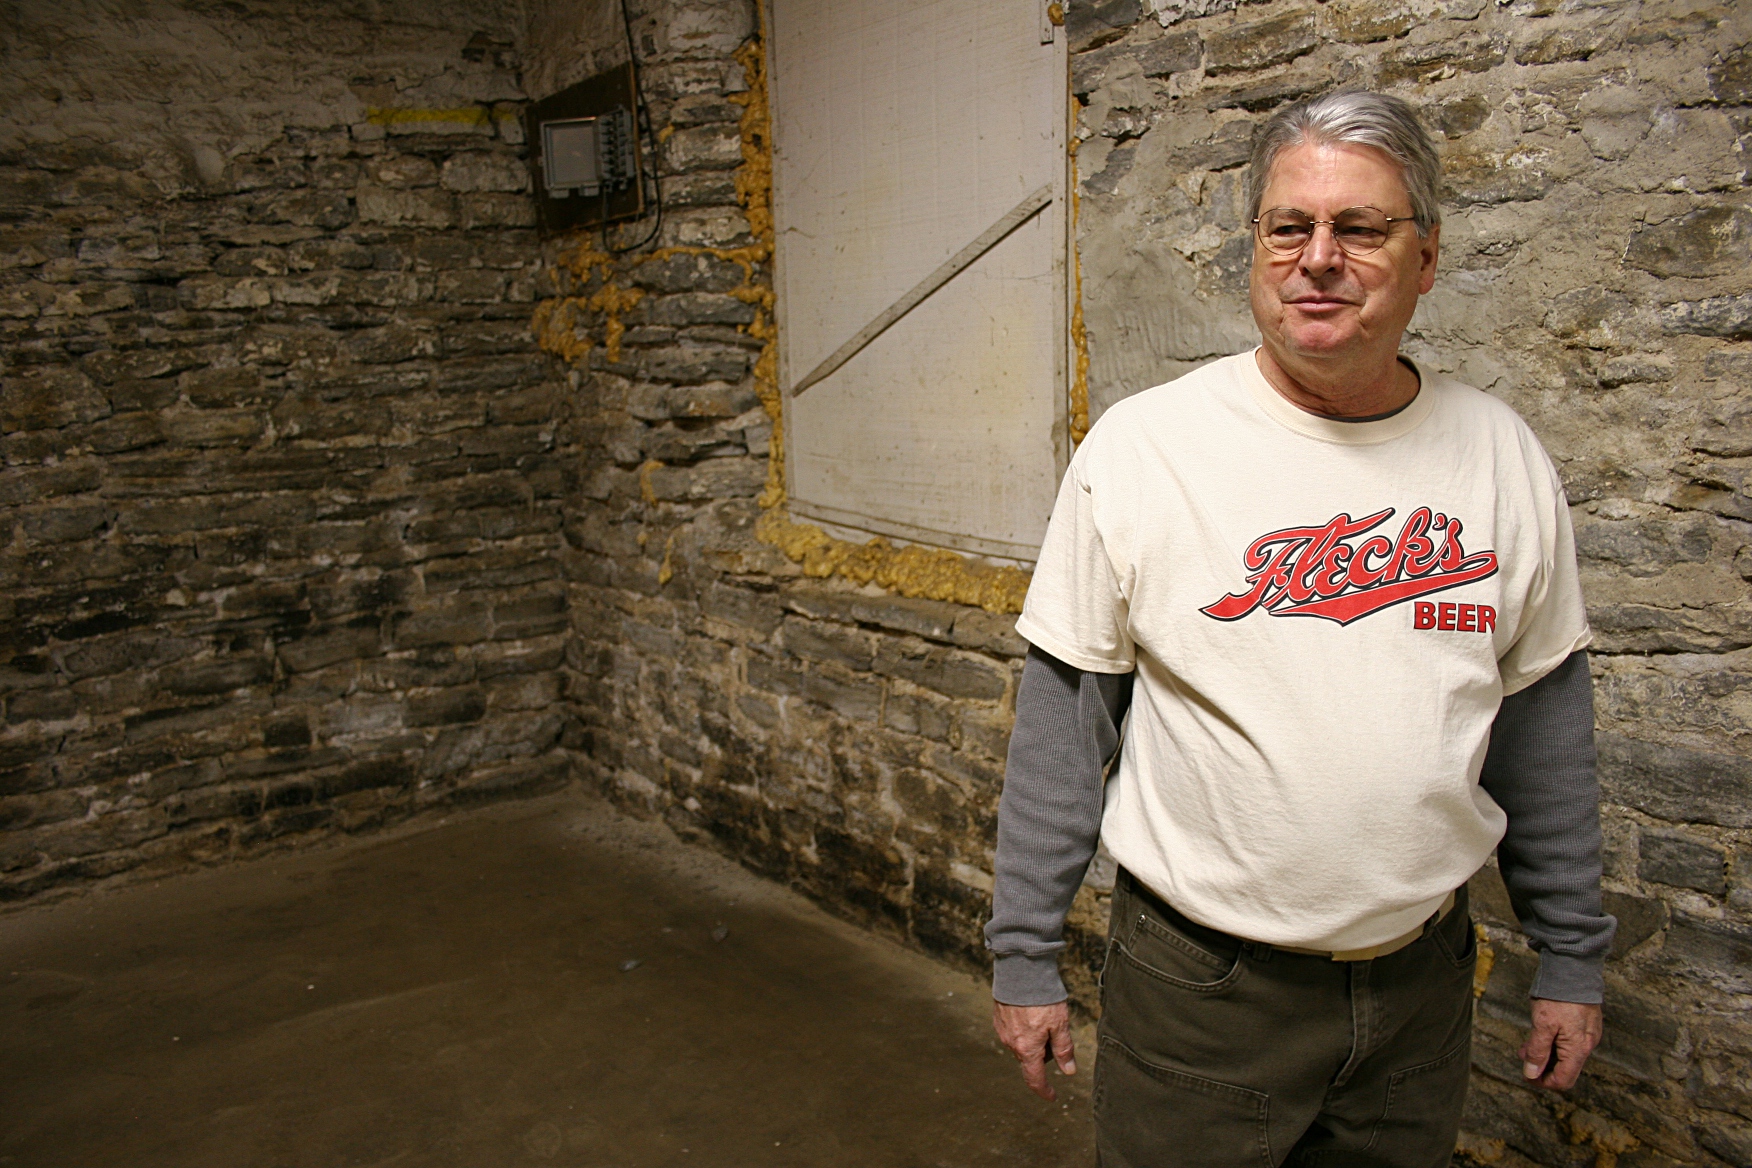 David Hvistendahl, from whom Patriot's is renting space for the brewery, sports a Fleck's beer t-shirt. A line of Fleck's Hvistendahl and a partner plan to eventually open an event center int he space above the brewery. 